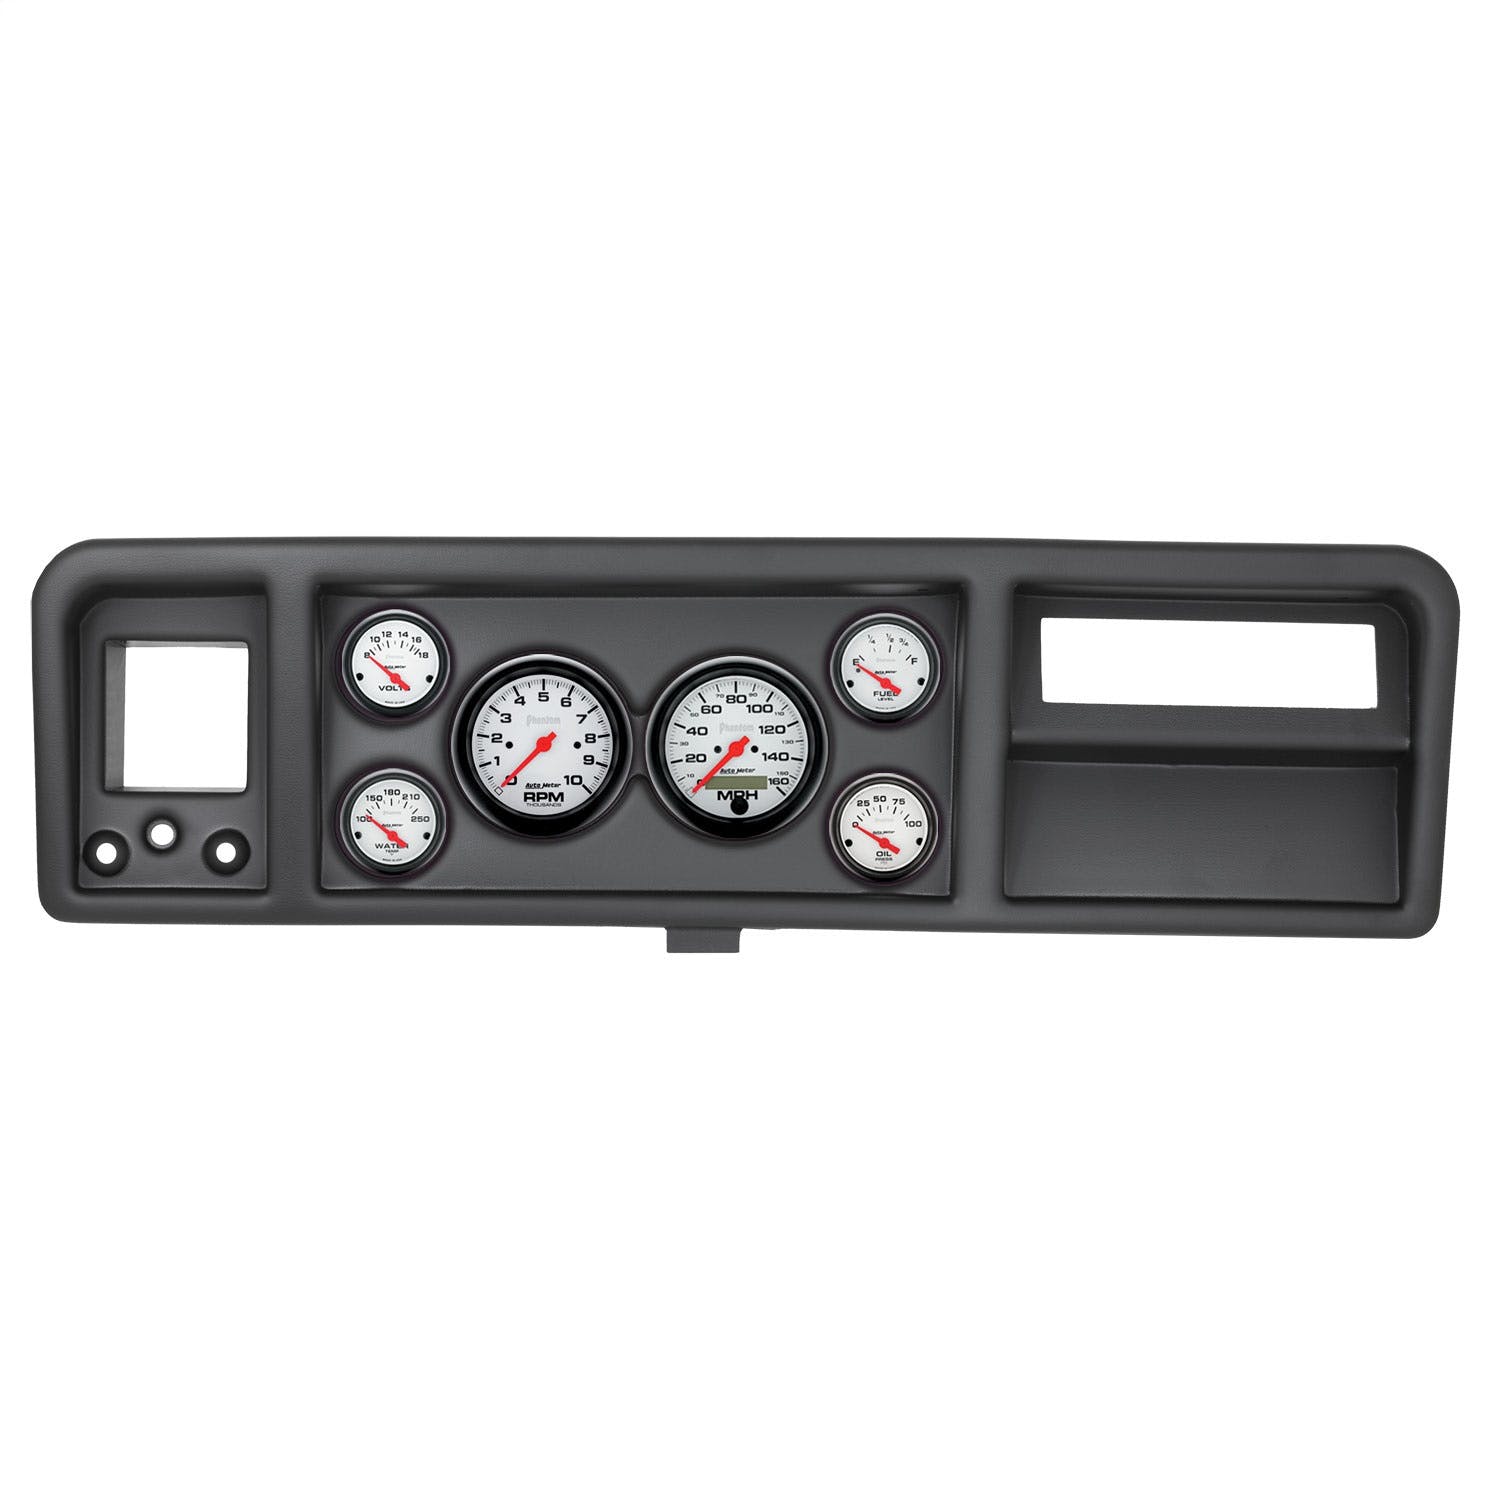 AutoMeter Products 2146-09 6 Gauge Direct-Fit Dash Kit, Ford Truck 73-79, Phantom